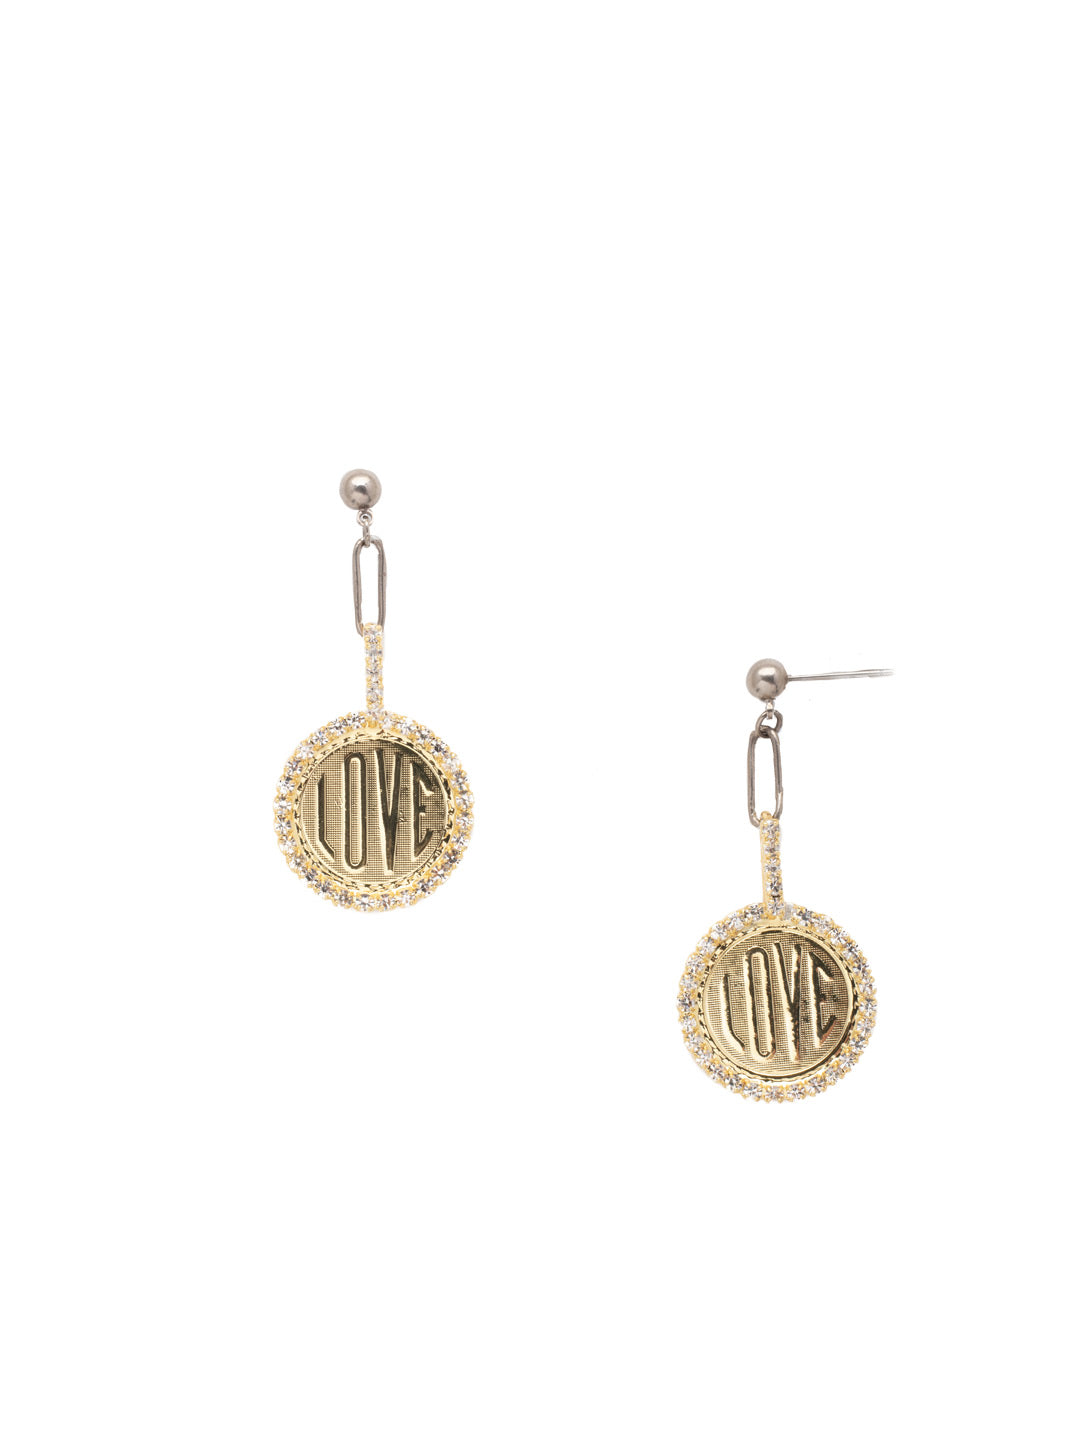 Luvie Dangle Earring - EFA1MXCRY - <p>The Luvie Dangle Earrings feature a popular love script coin hanging from a single paperclip chain link. From Sorrelli's Crystal collection in our Mixed Metal finish.</p>